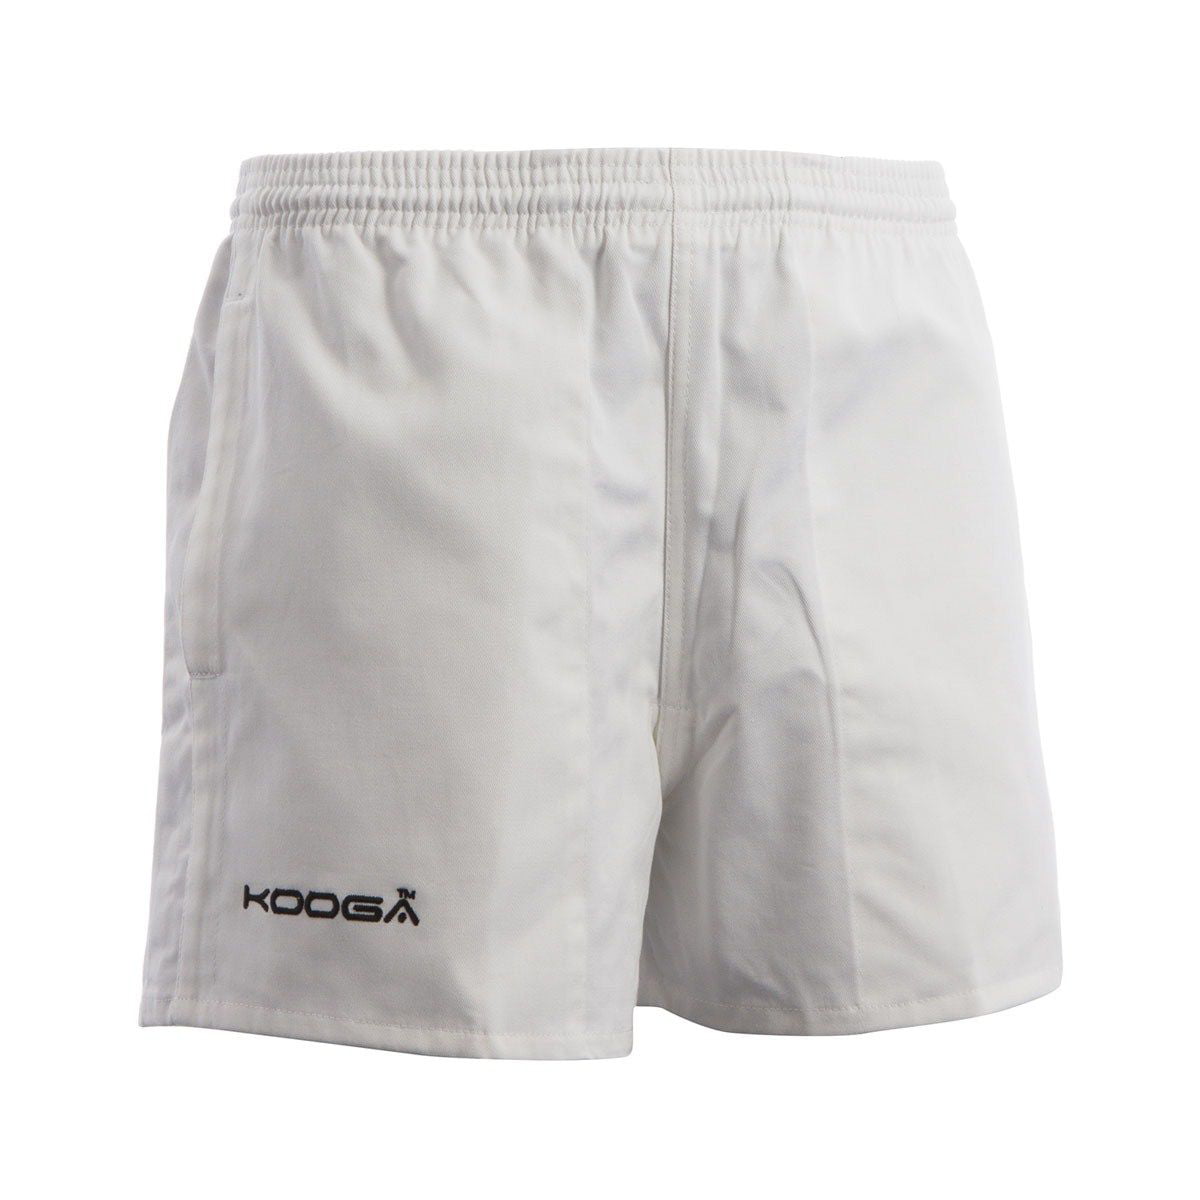 Kooga Power Cycle Rugby Under Shorts White